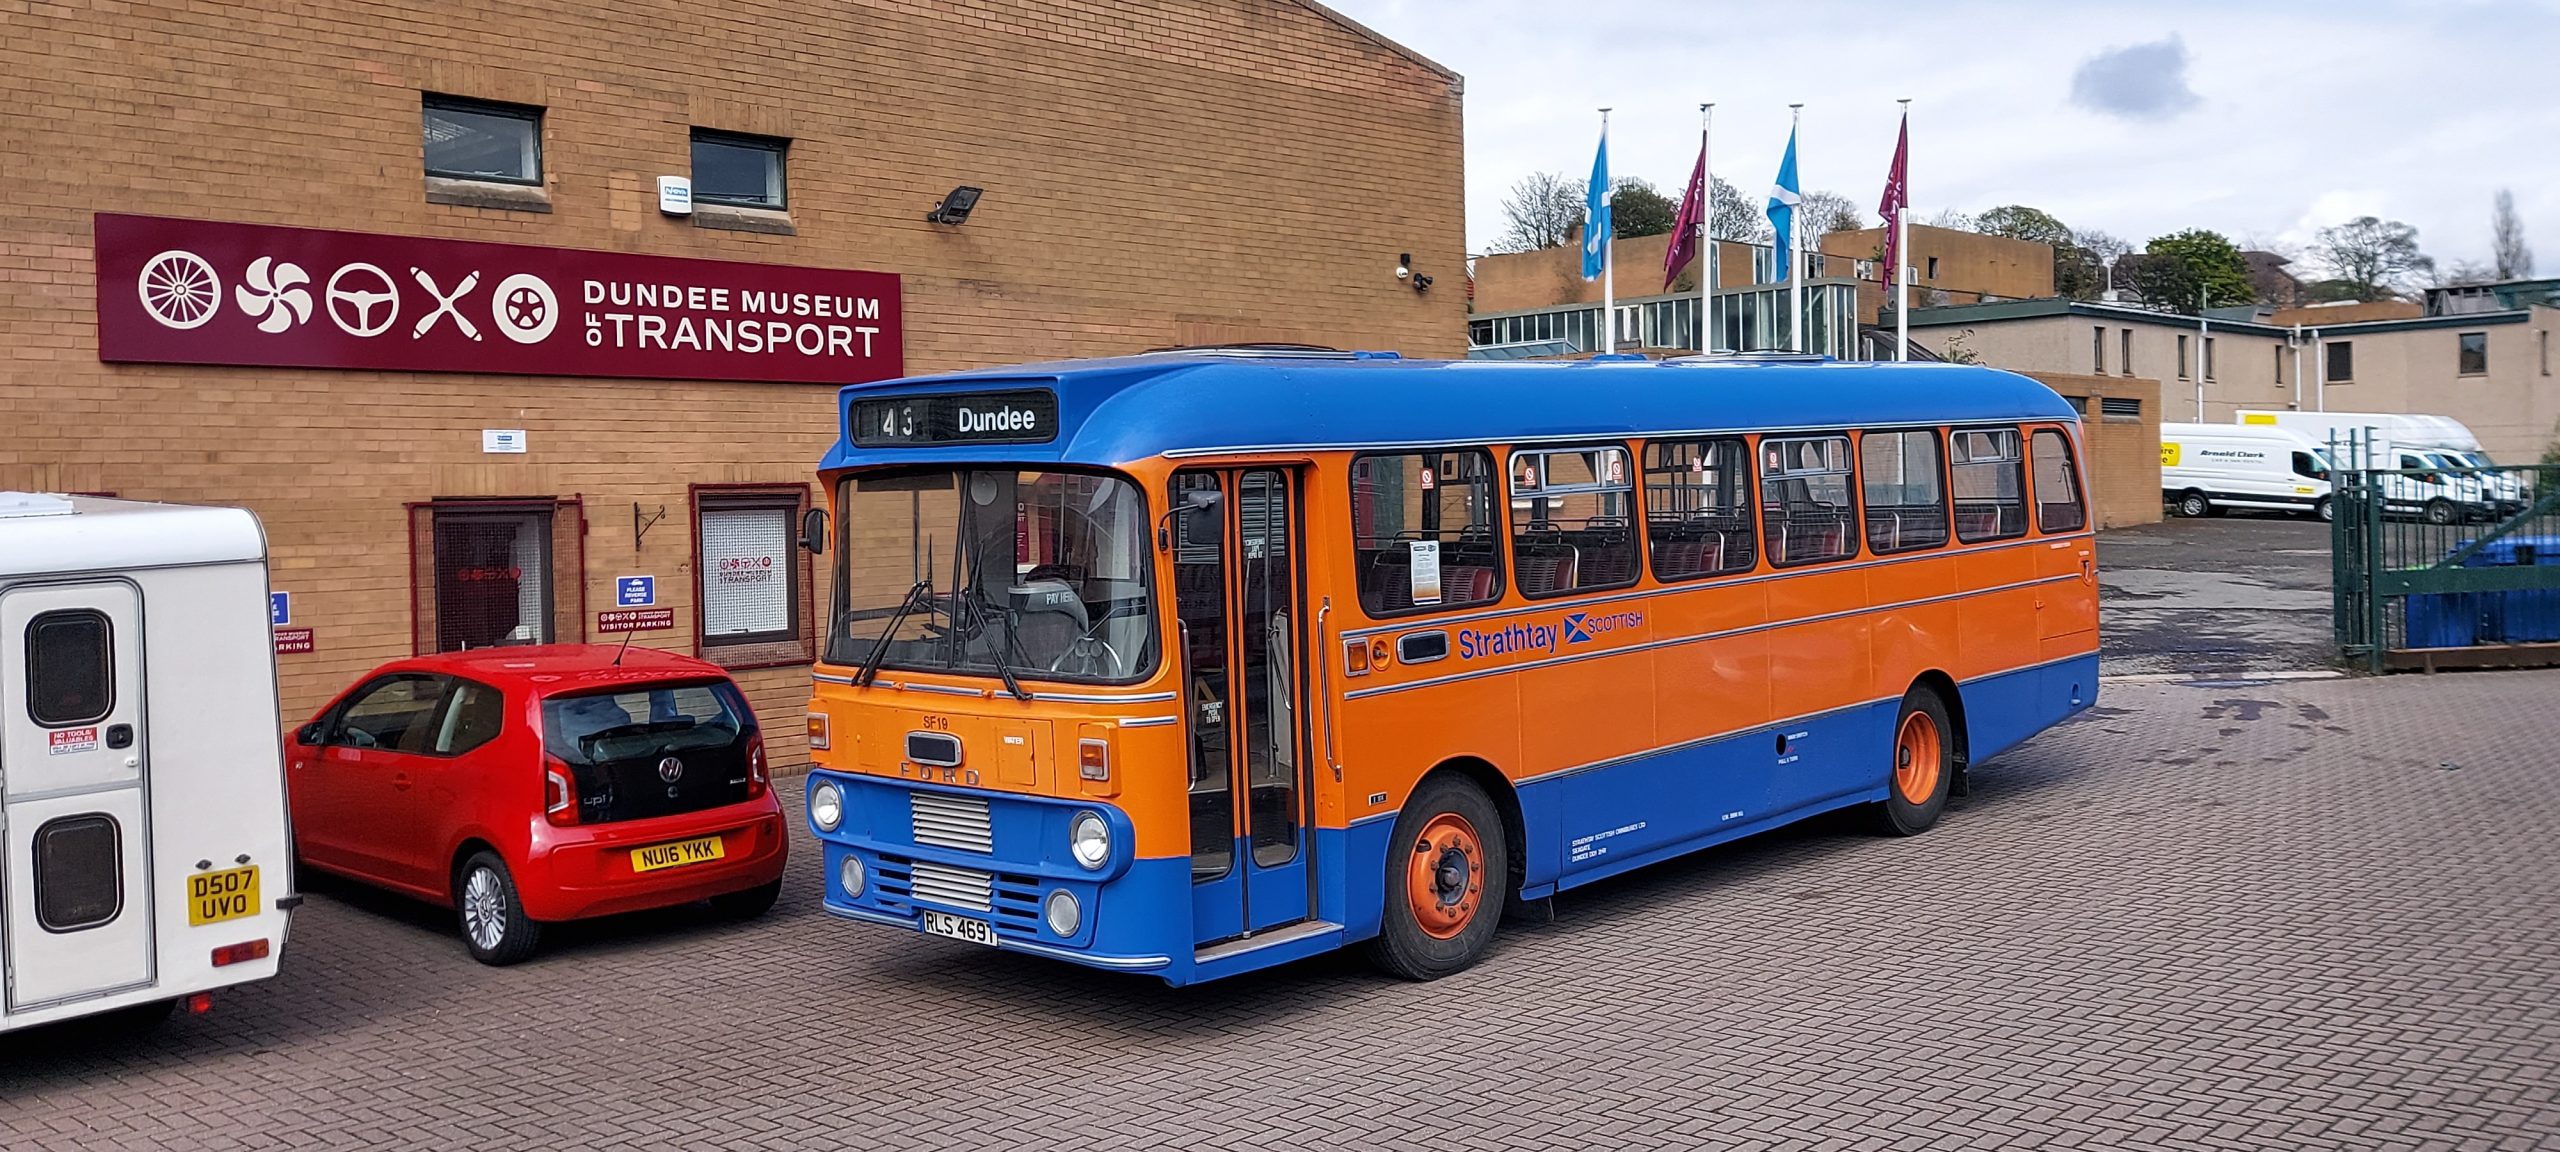 Image showing Dundee Museum of Transport